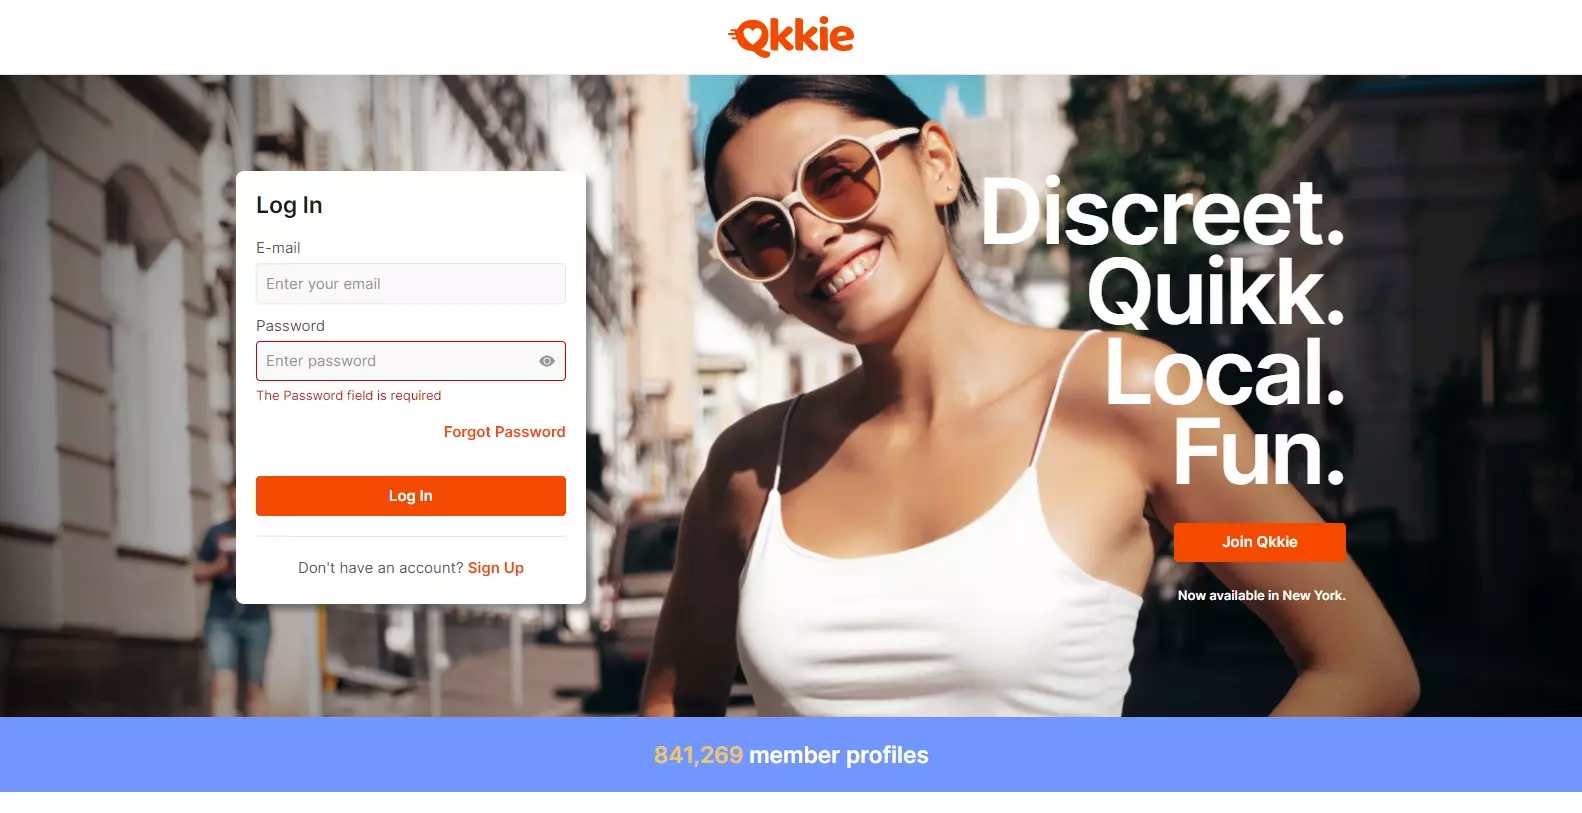 Qkkie dating site homepage featuring a young girl in white tank top and sunglasses, smiling.